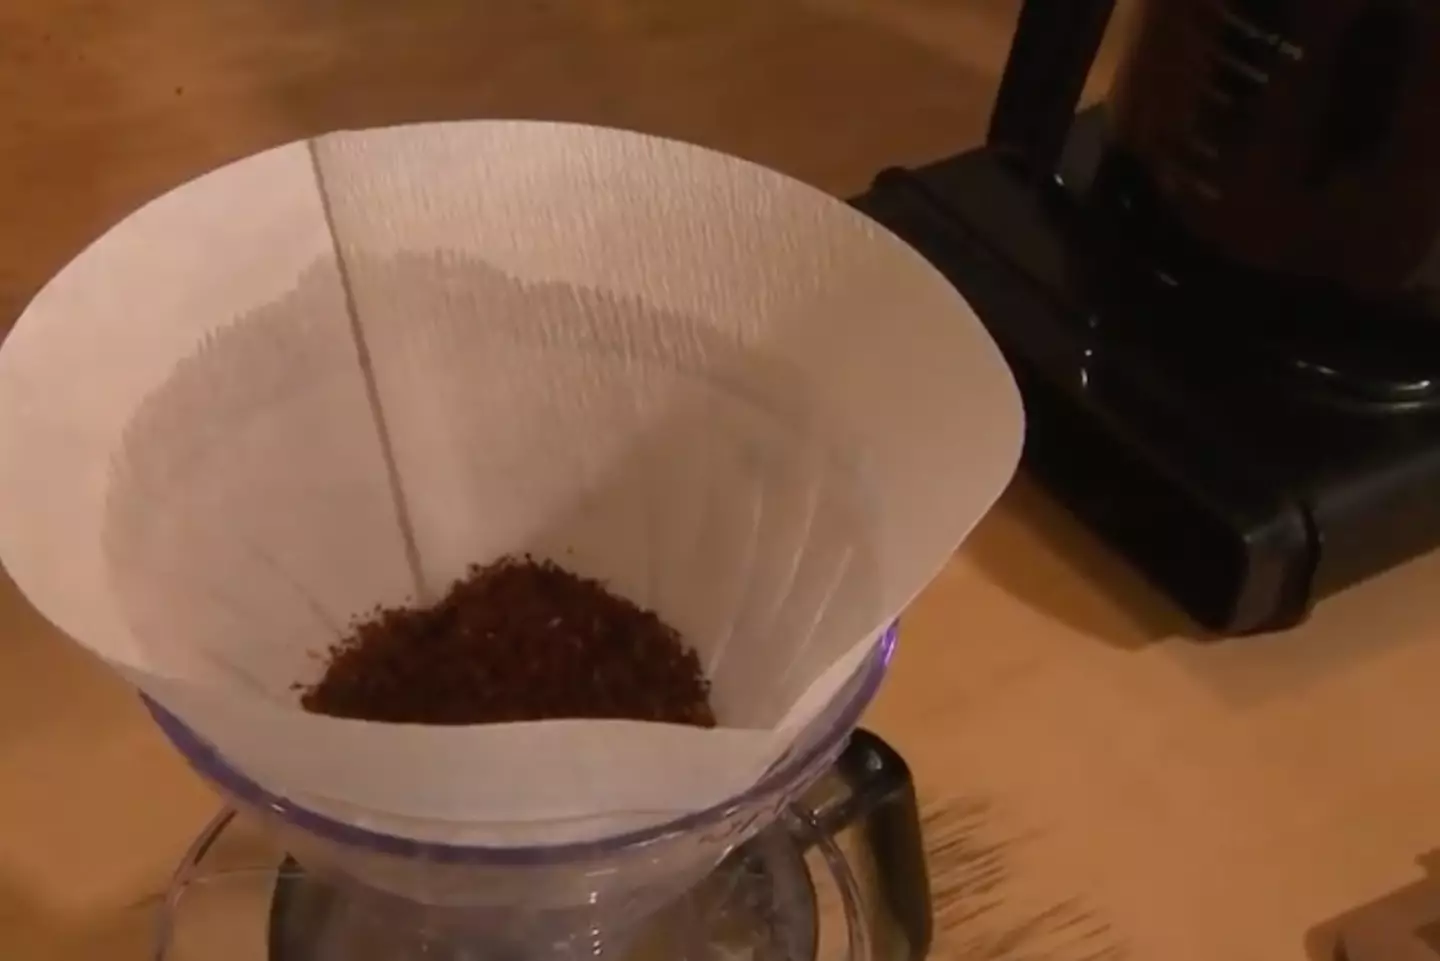 The coffee undergoes a rigorous process before being served.